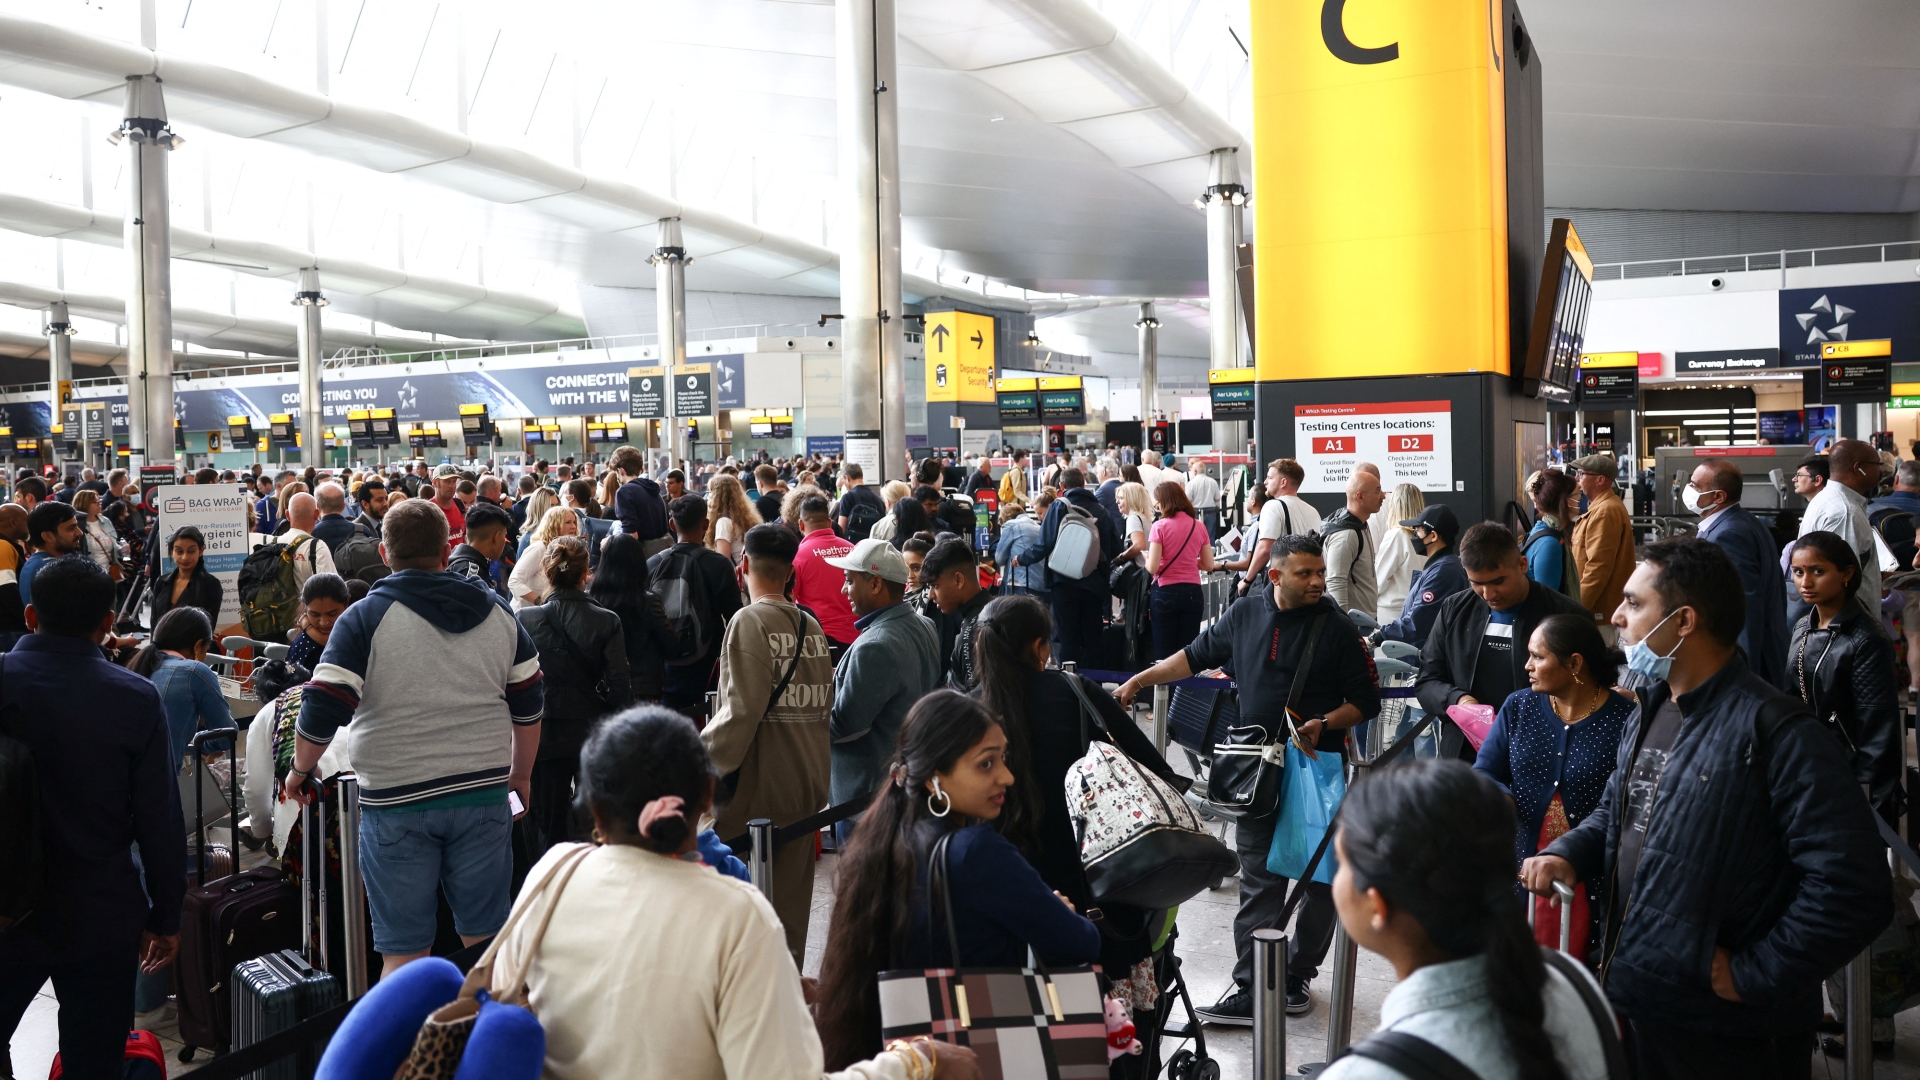 Here are my top tips for dealing with delayed flights.